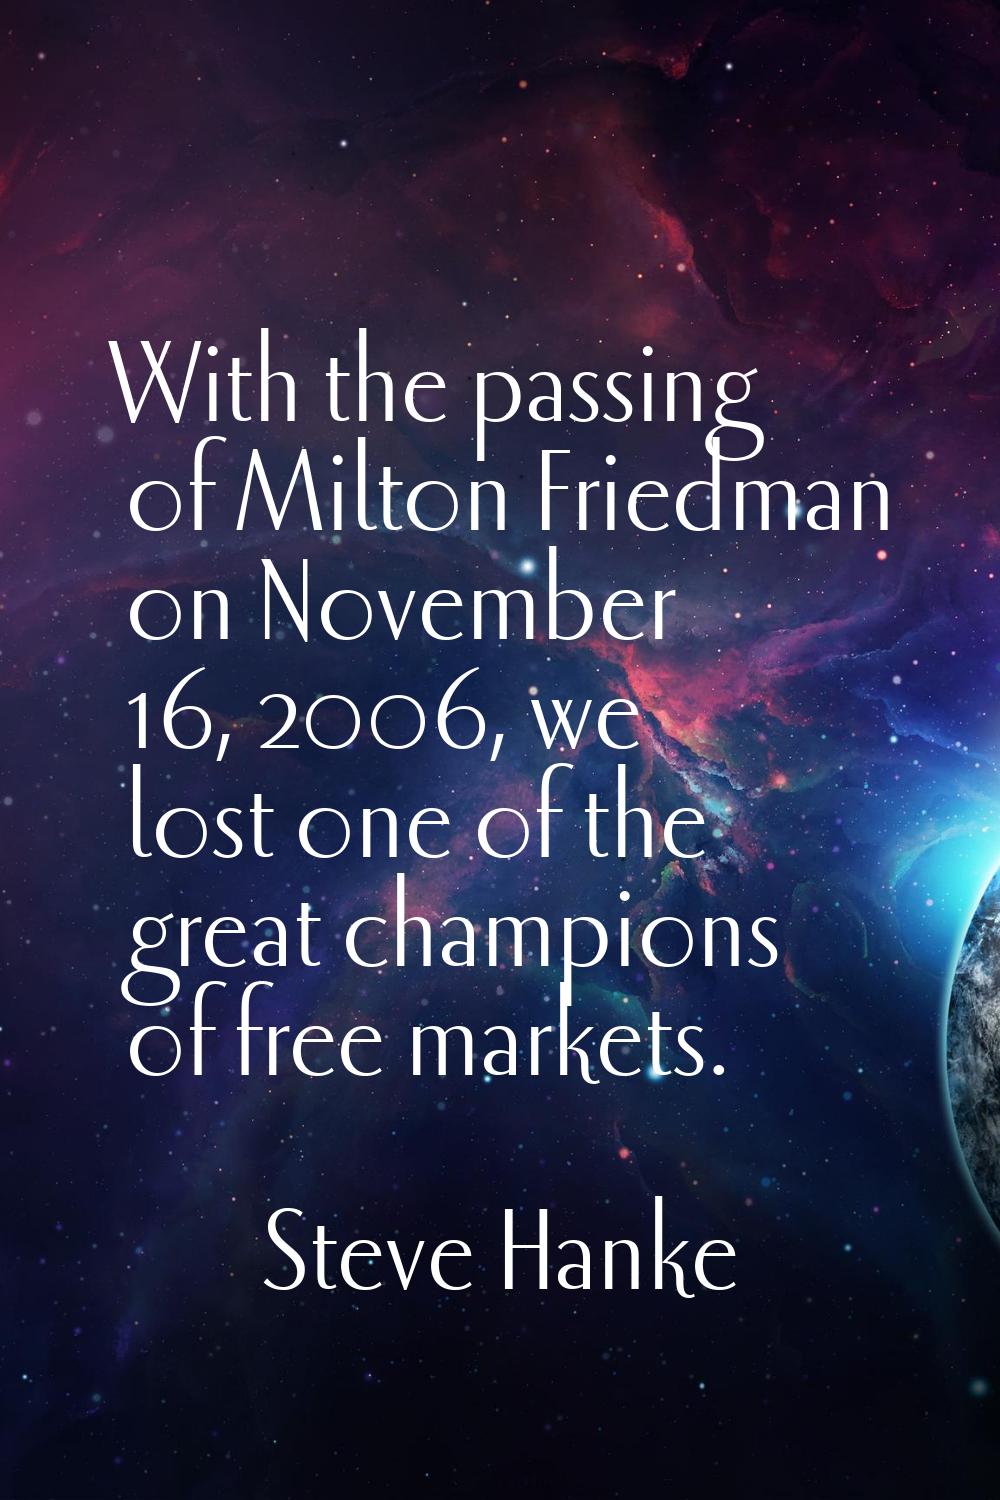 With the passing of Milton Friedman on November 16, 2006, we lost one of the great champions of fre